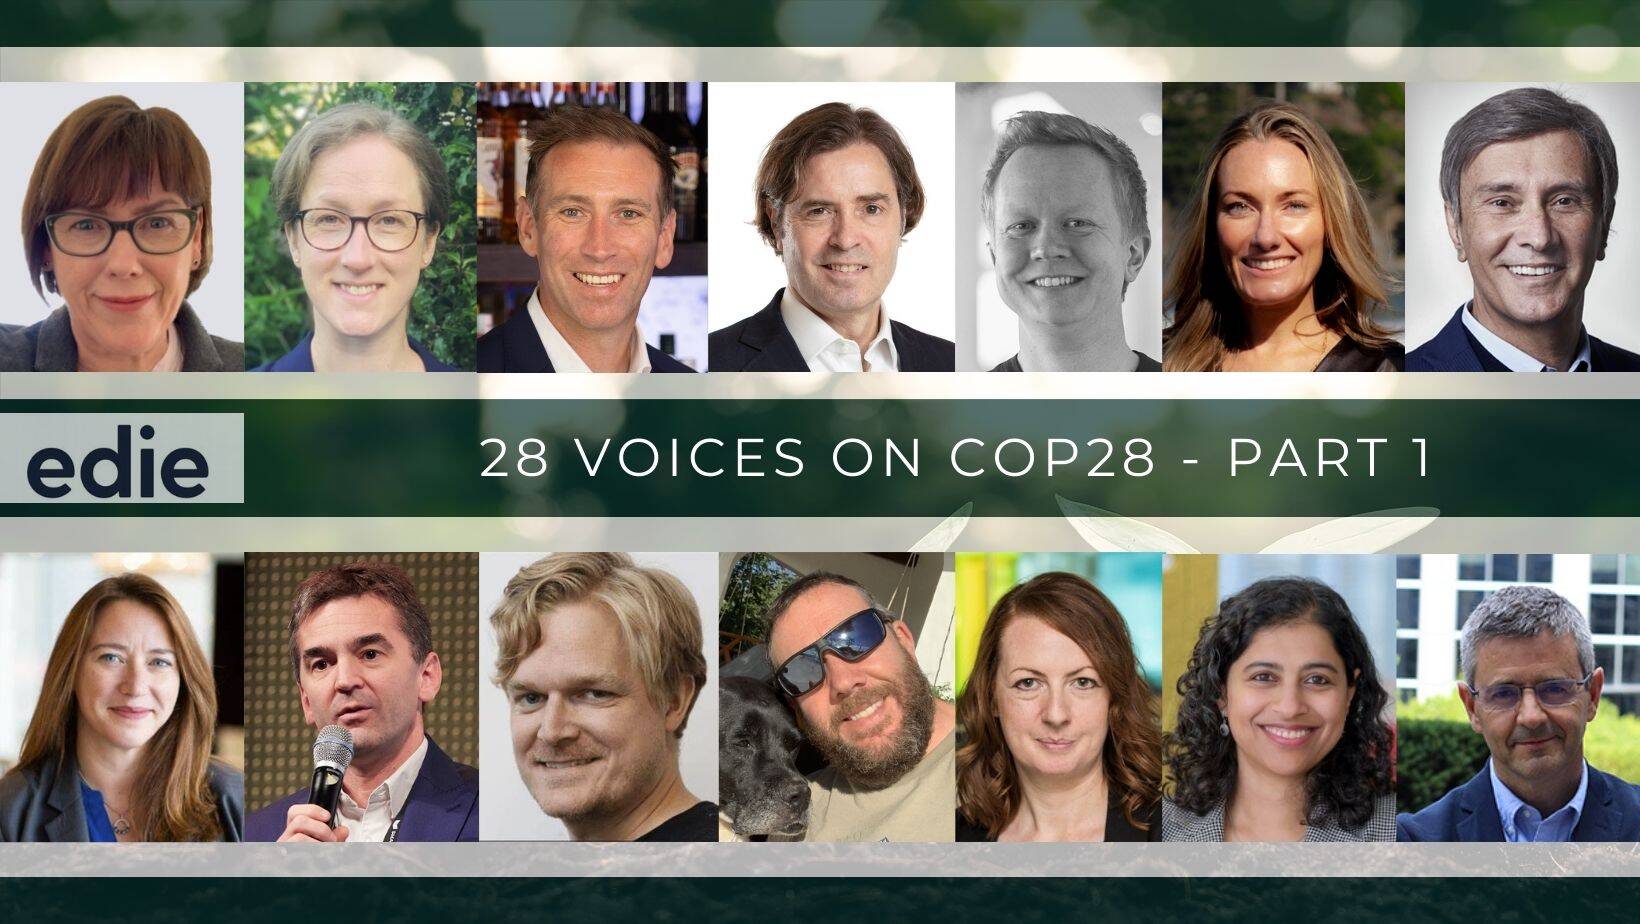 ‘Later is too late’: Hundreds of businesses and climate leaders call for COP28 to put 1.5C back on track